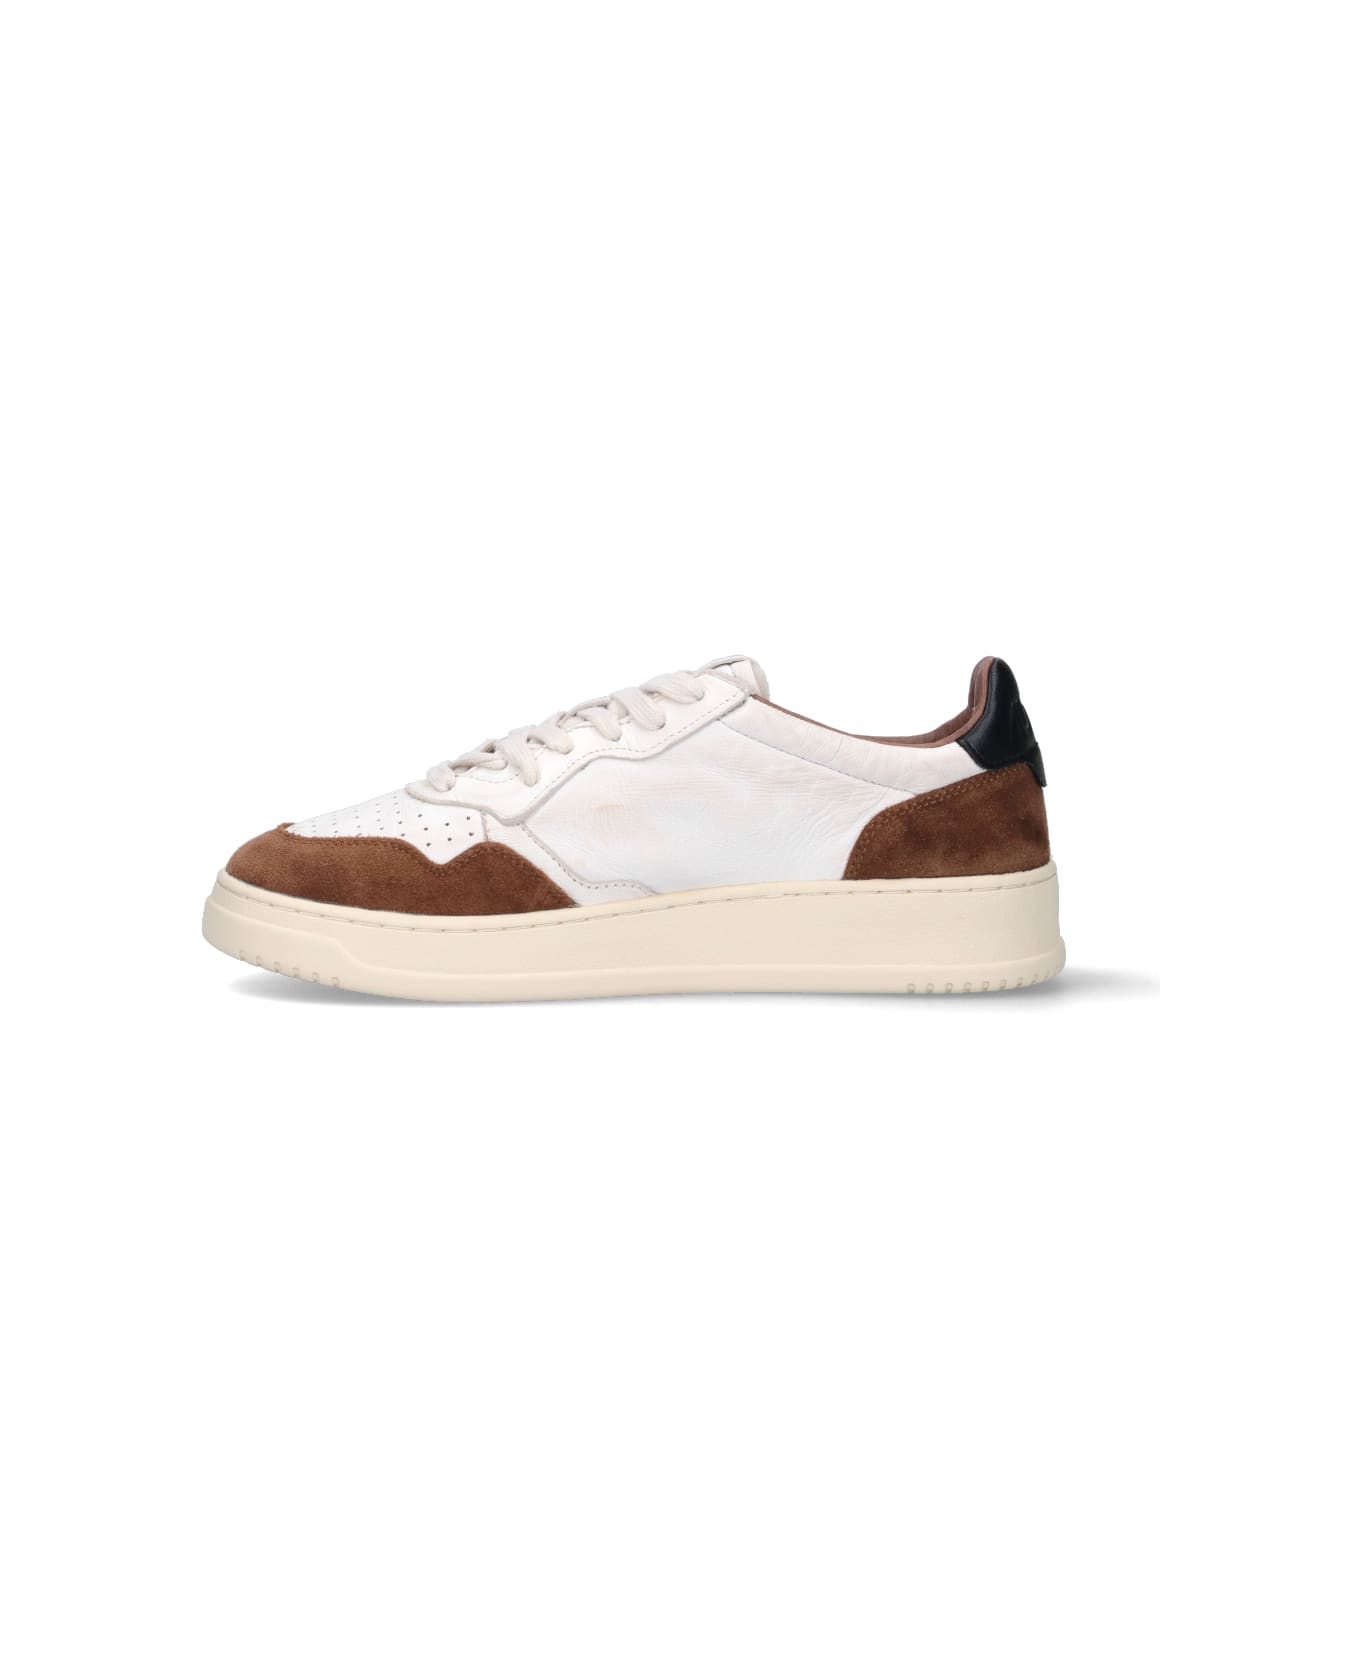 Autry Medalist Low Sneakers In Brown Suede And White Leather - White